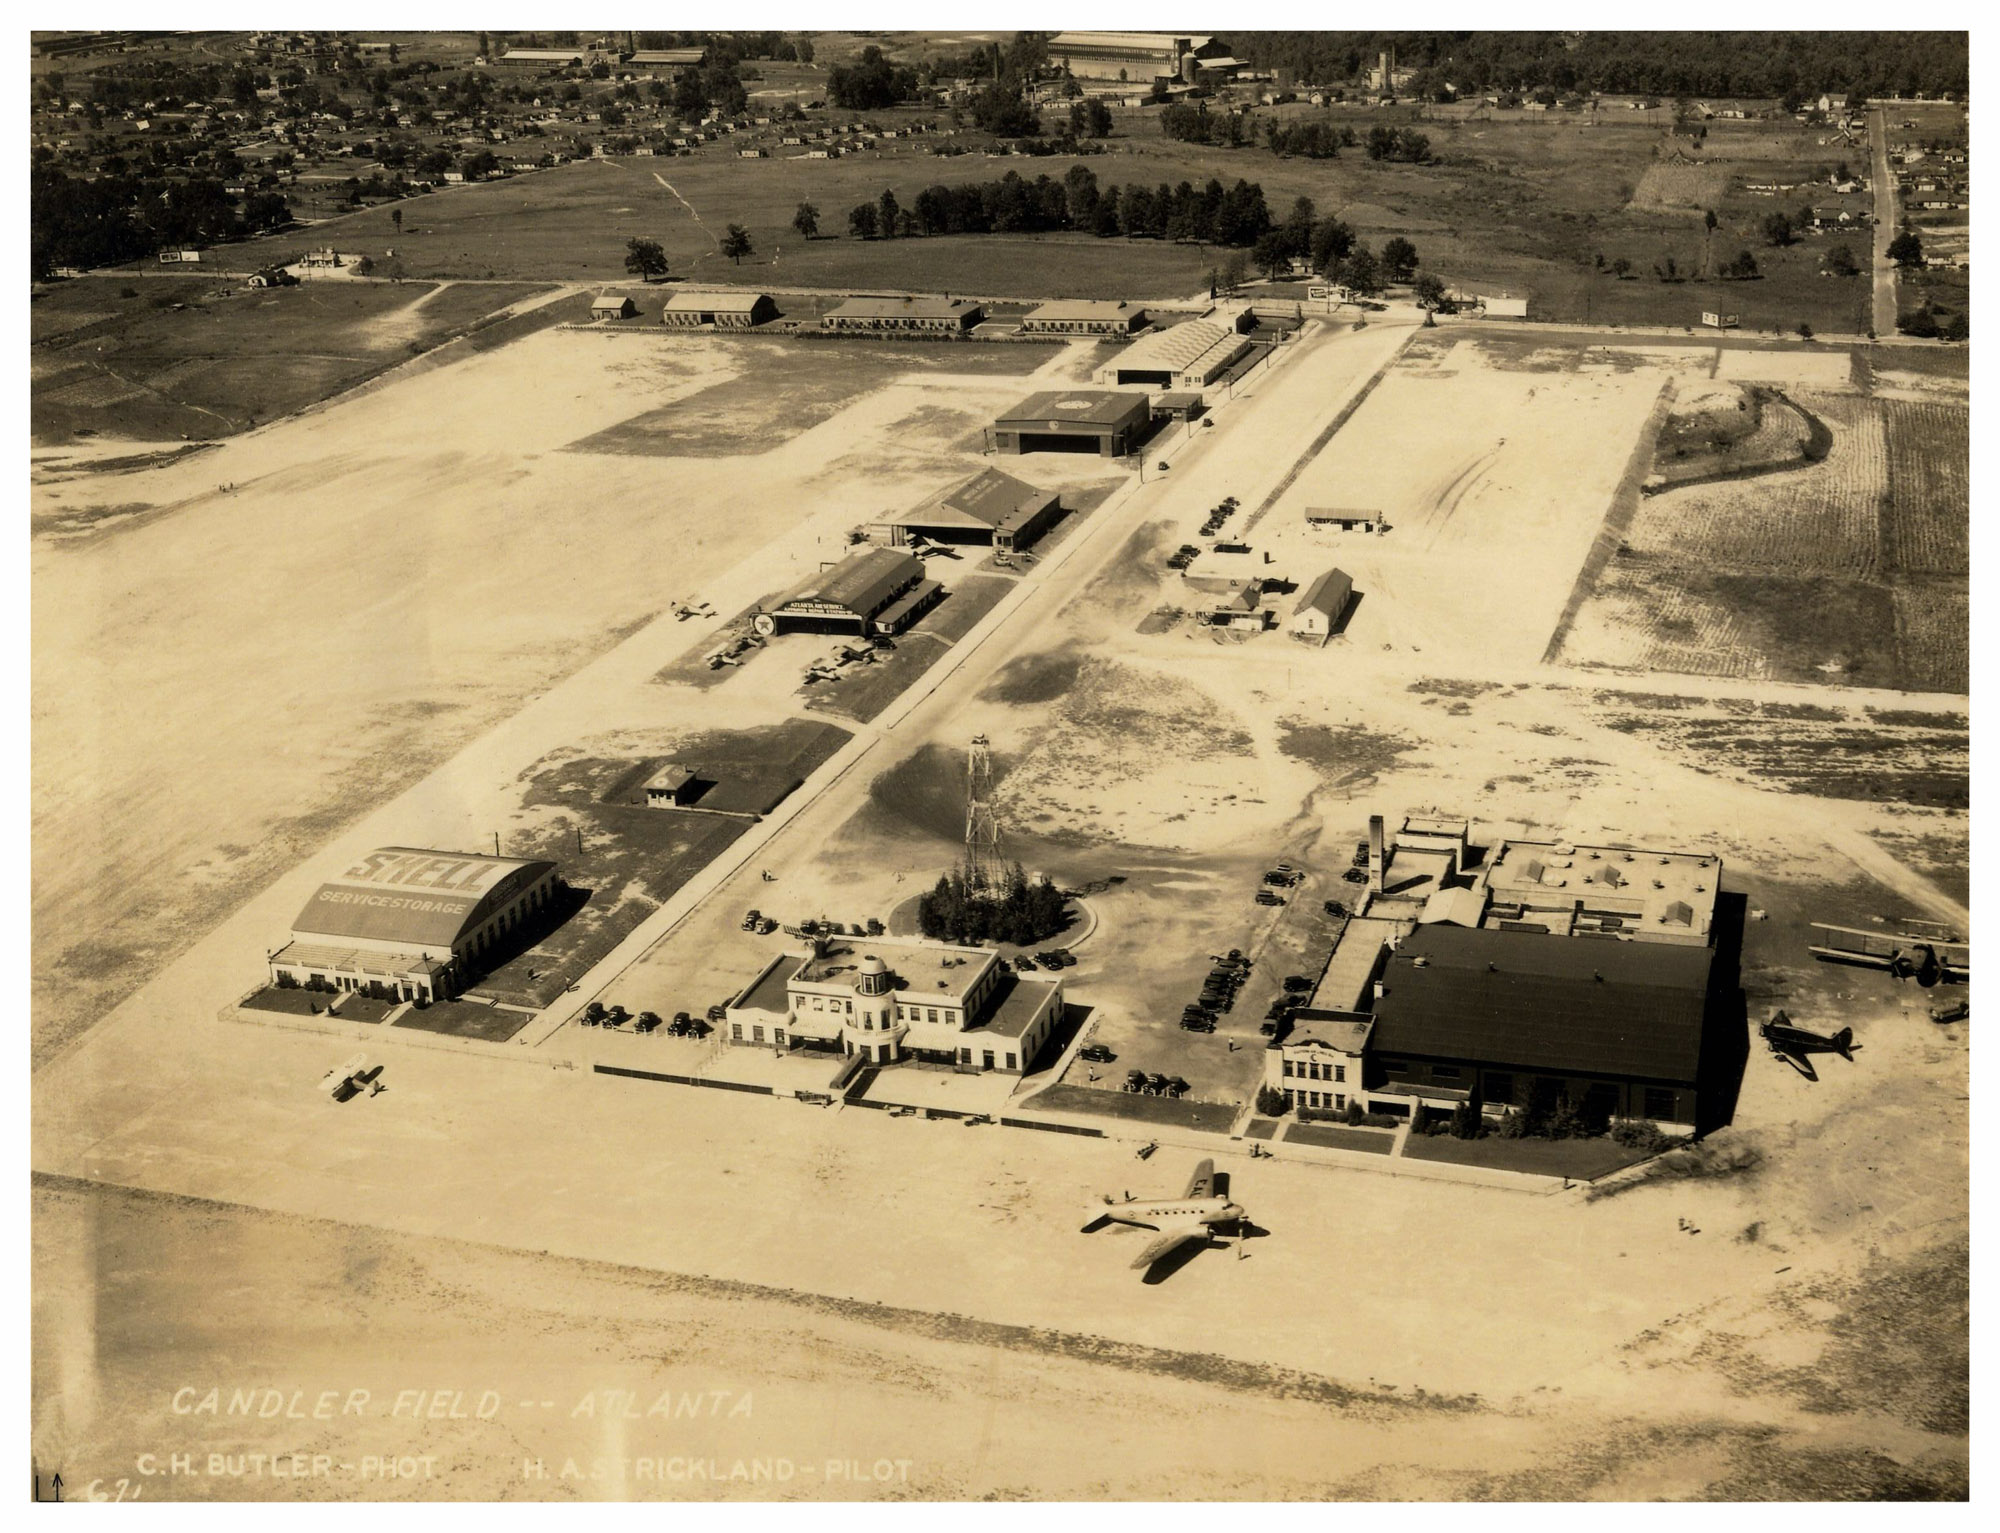 Candler Field Aerial Photo